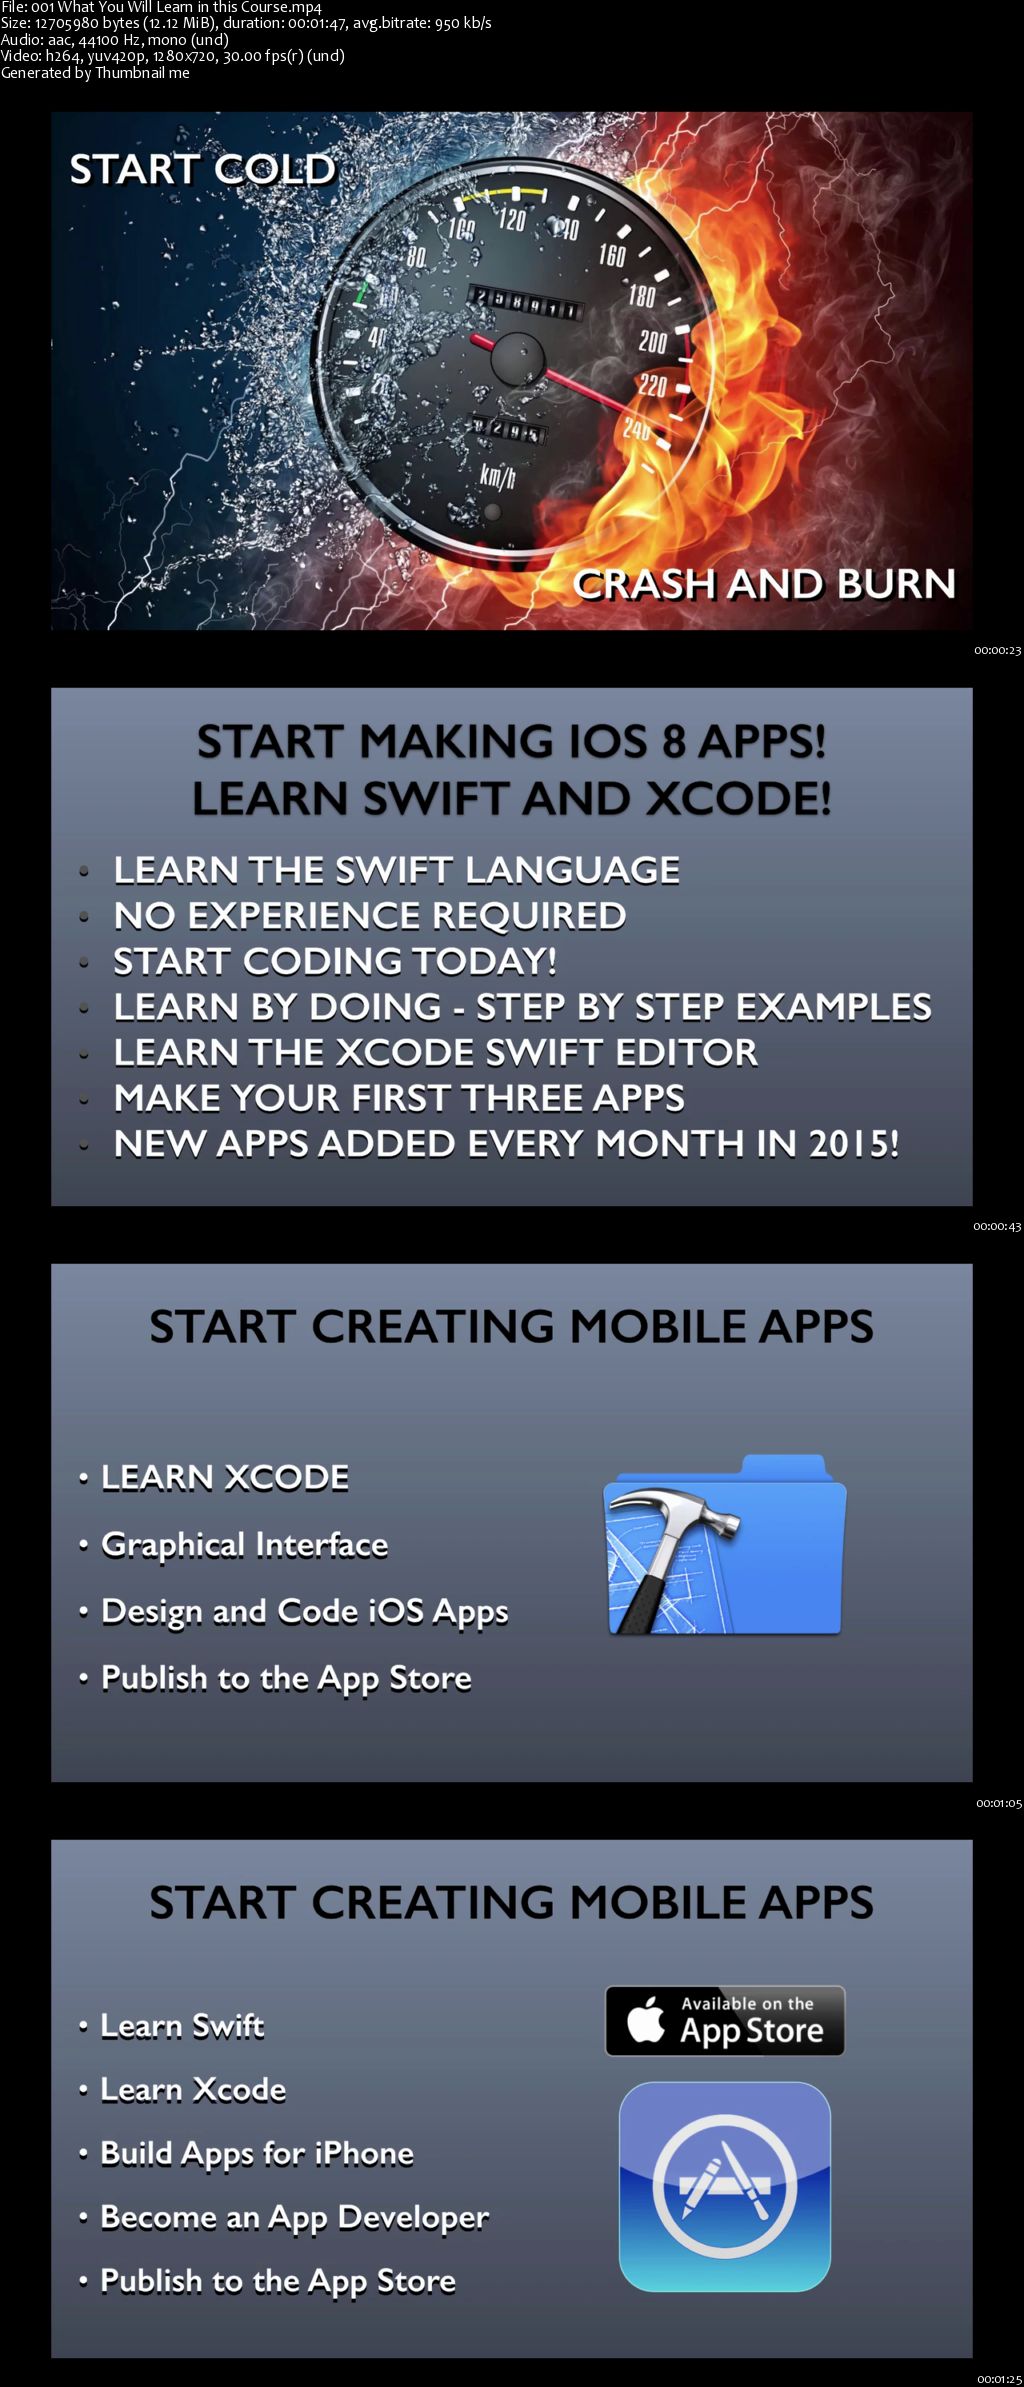 Make iPhone Apps Using Swift, Xcode and iOS8 - 7 Apps